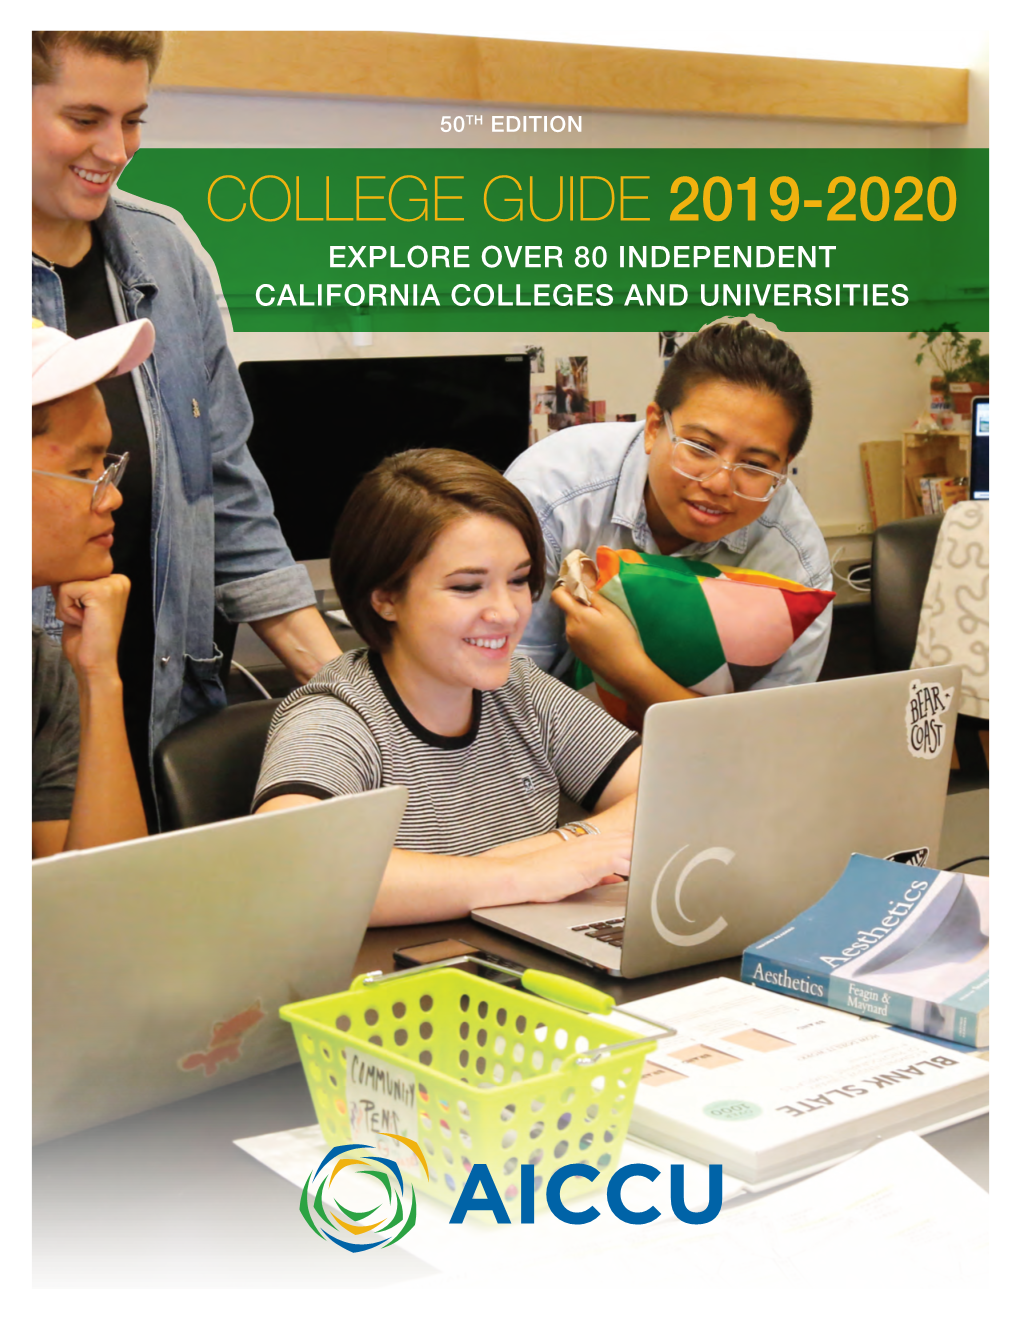 College Guide 2019-2020 Explore Over 80 Independent California Colleges and Universities